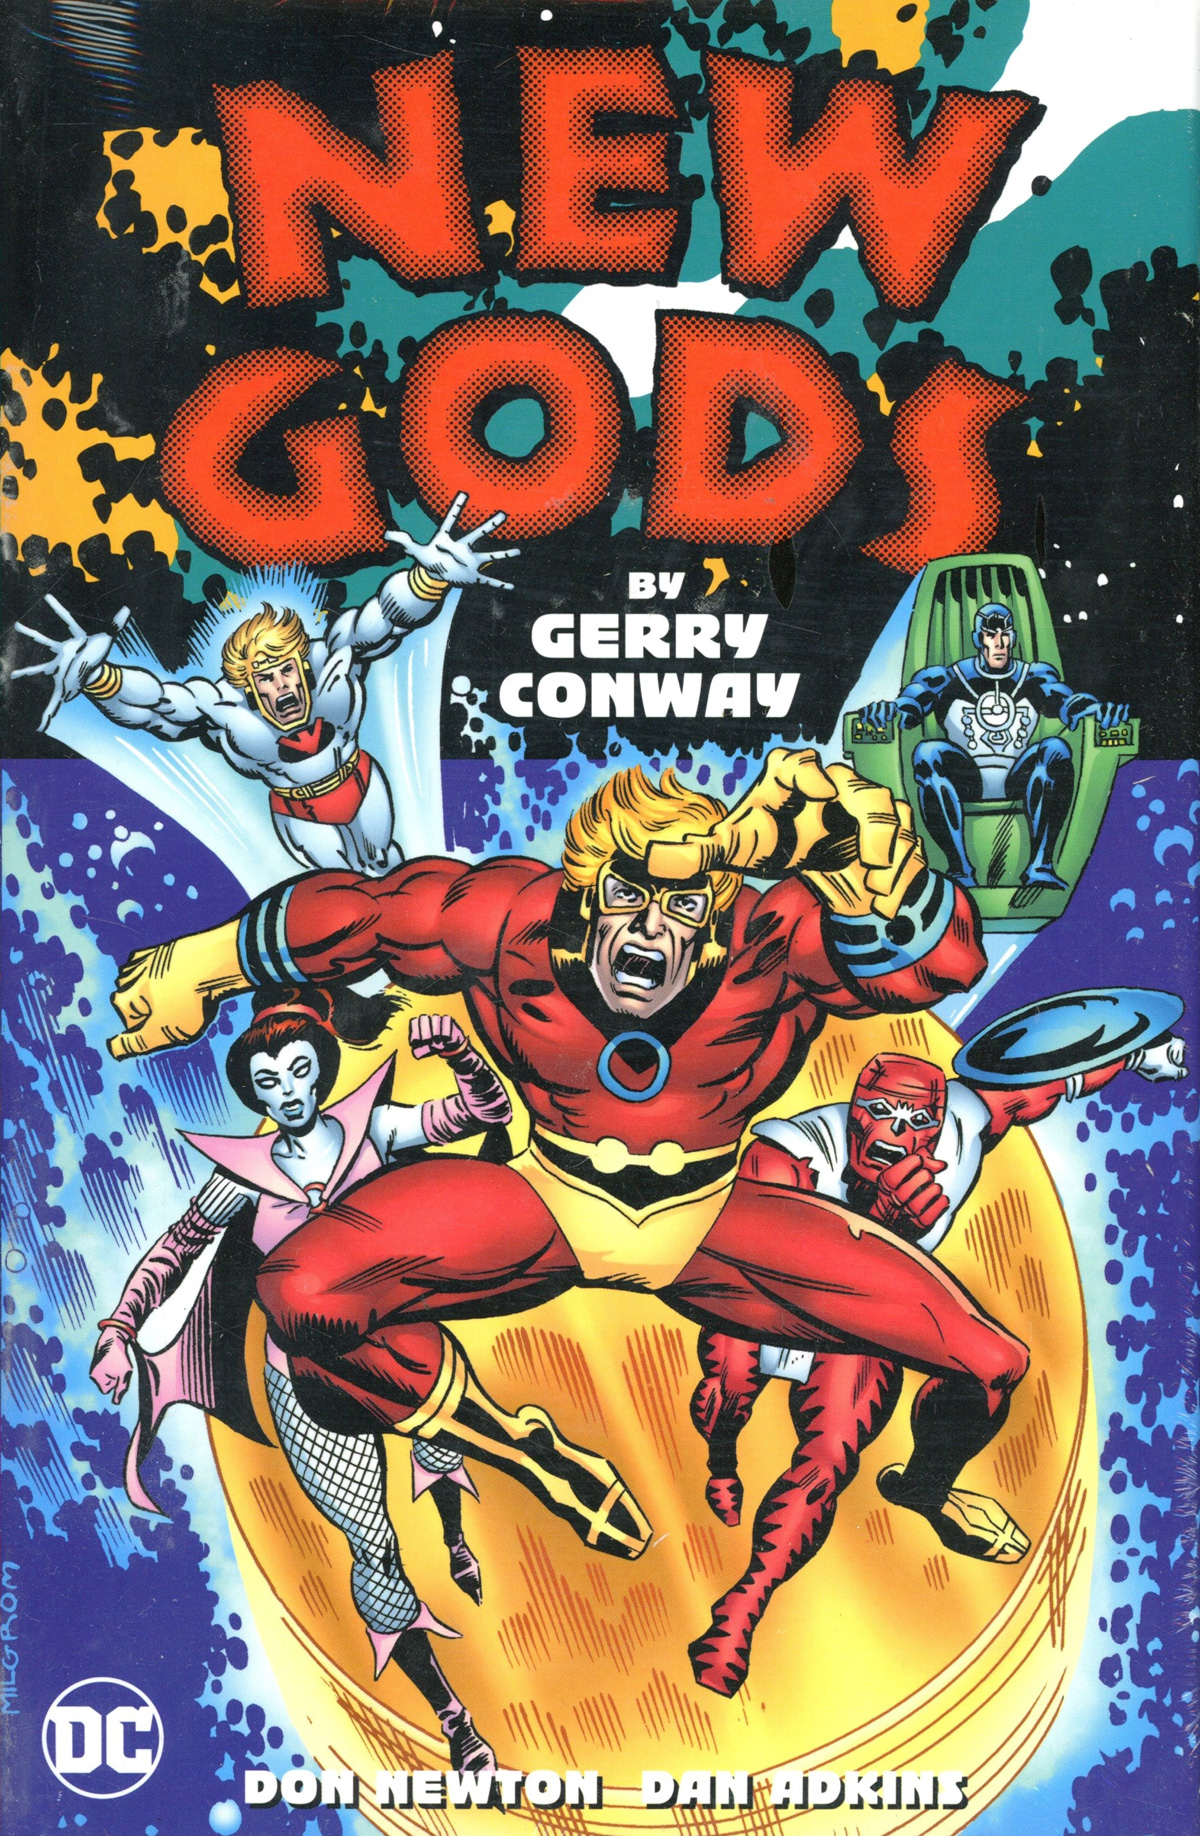 New Gods By Gerry Conway HC